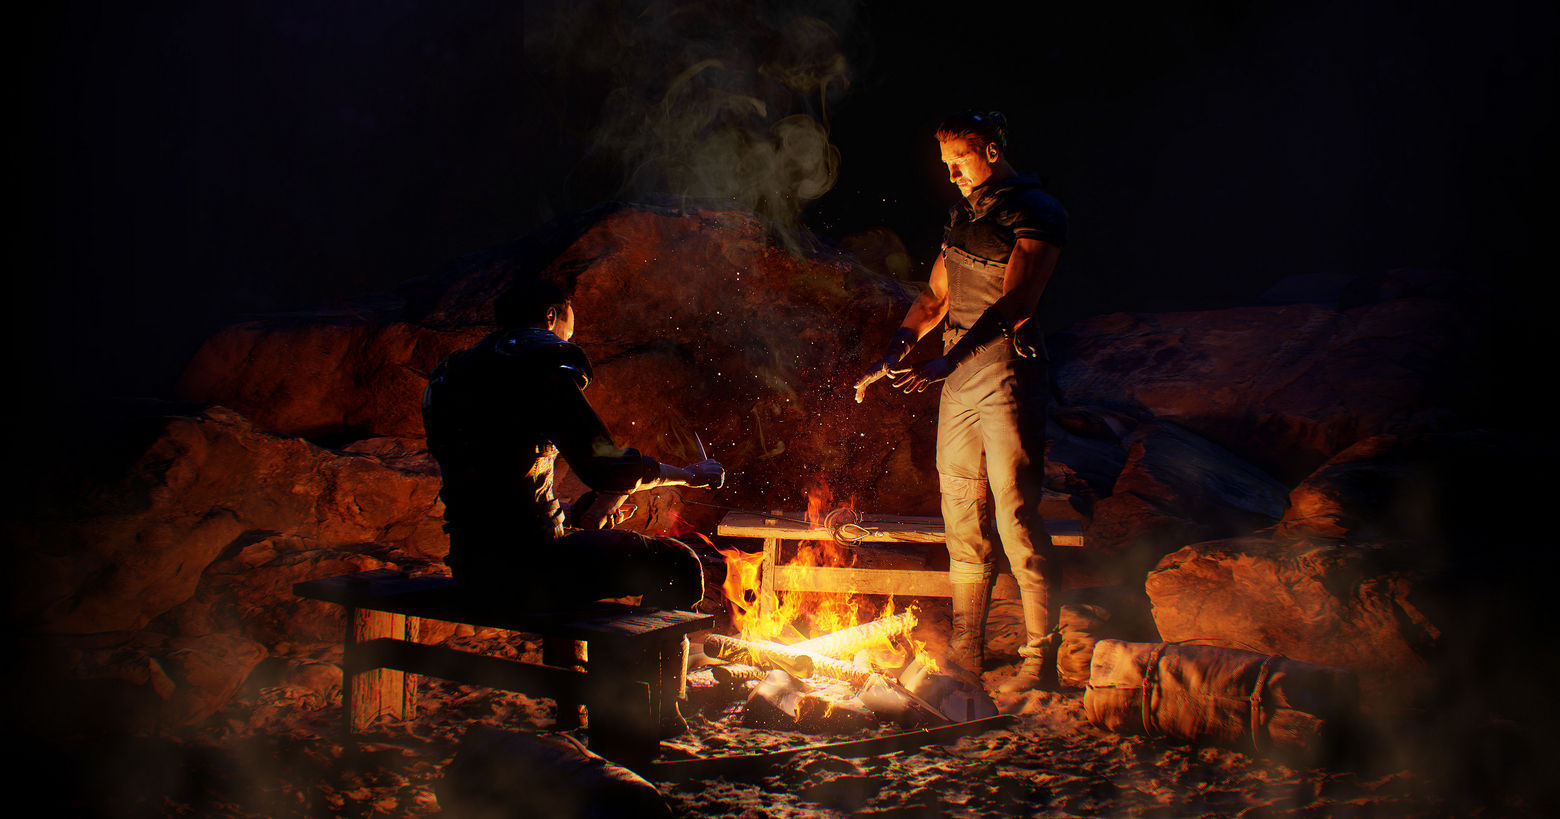 A playable teaser was released for the Gothic remake, in which gamers could already try out the gameplay and admire the graphics, as seen here in the screenshot: Two male characters dressed in medieval style are shown in the middle of the night in a long shot in front of a campfire. They are in the center of the image. The person on the left is sitting on a wooden bench and is preparing a meal with a knife. The person on the right is standing by the campfire and has both his hands stretched out over it to warm them. The fire lights up the otherwise dark place with a reddish-yellow tone. Release date of the new Gothic Game is supposed to be December 2023 for PS5.